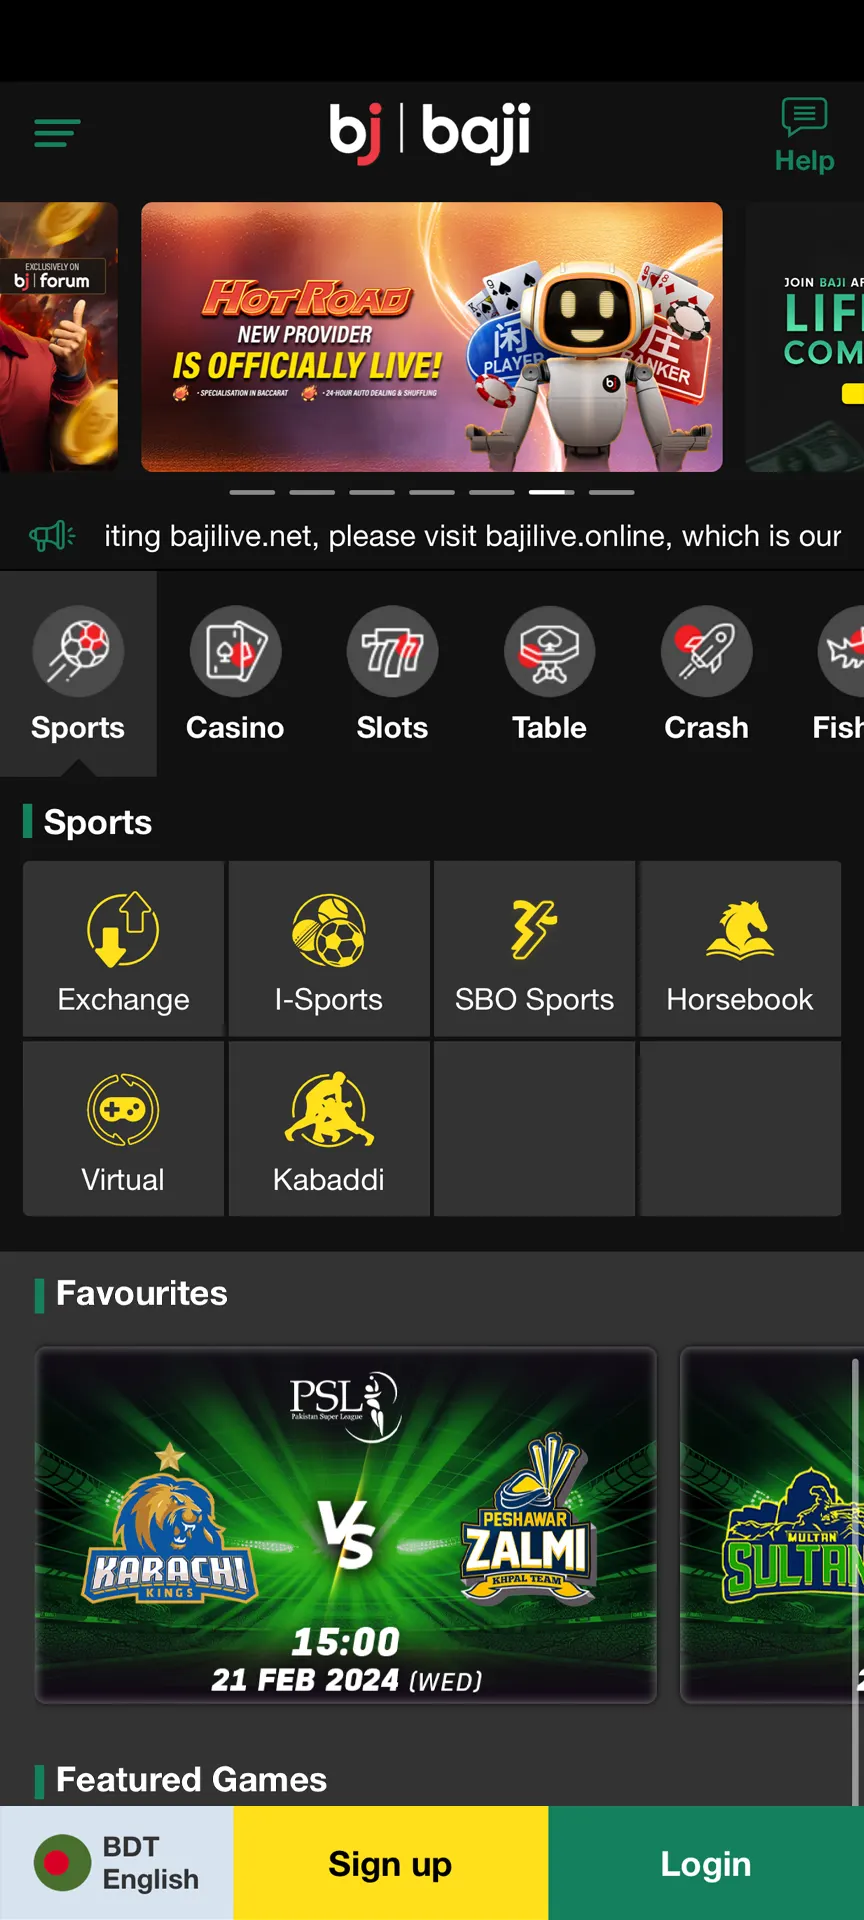 Visit the main section of the game Baji app and check out the capabilities of our bookmaker.